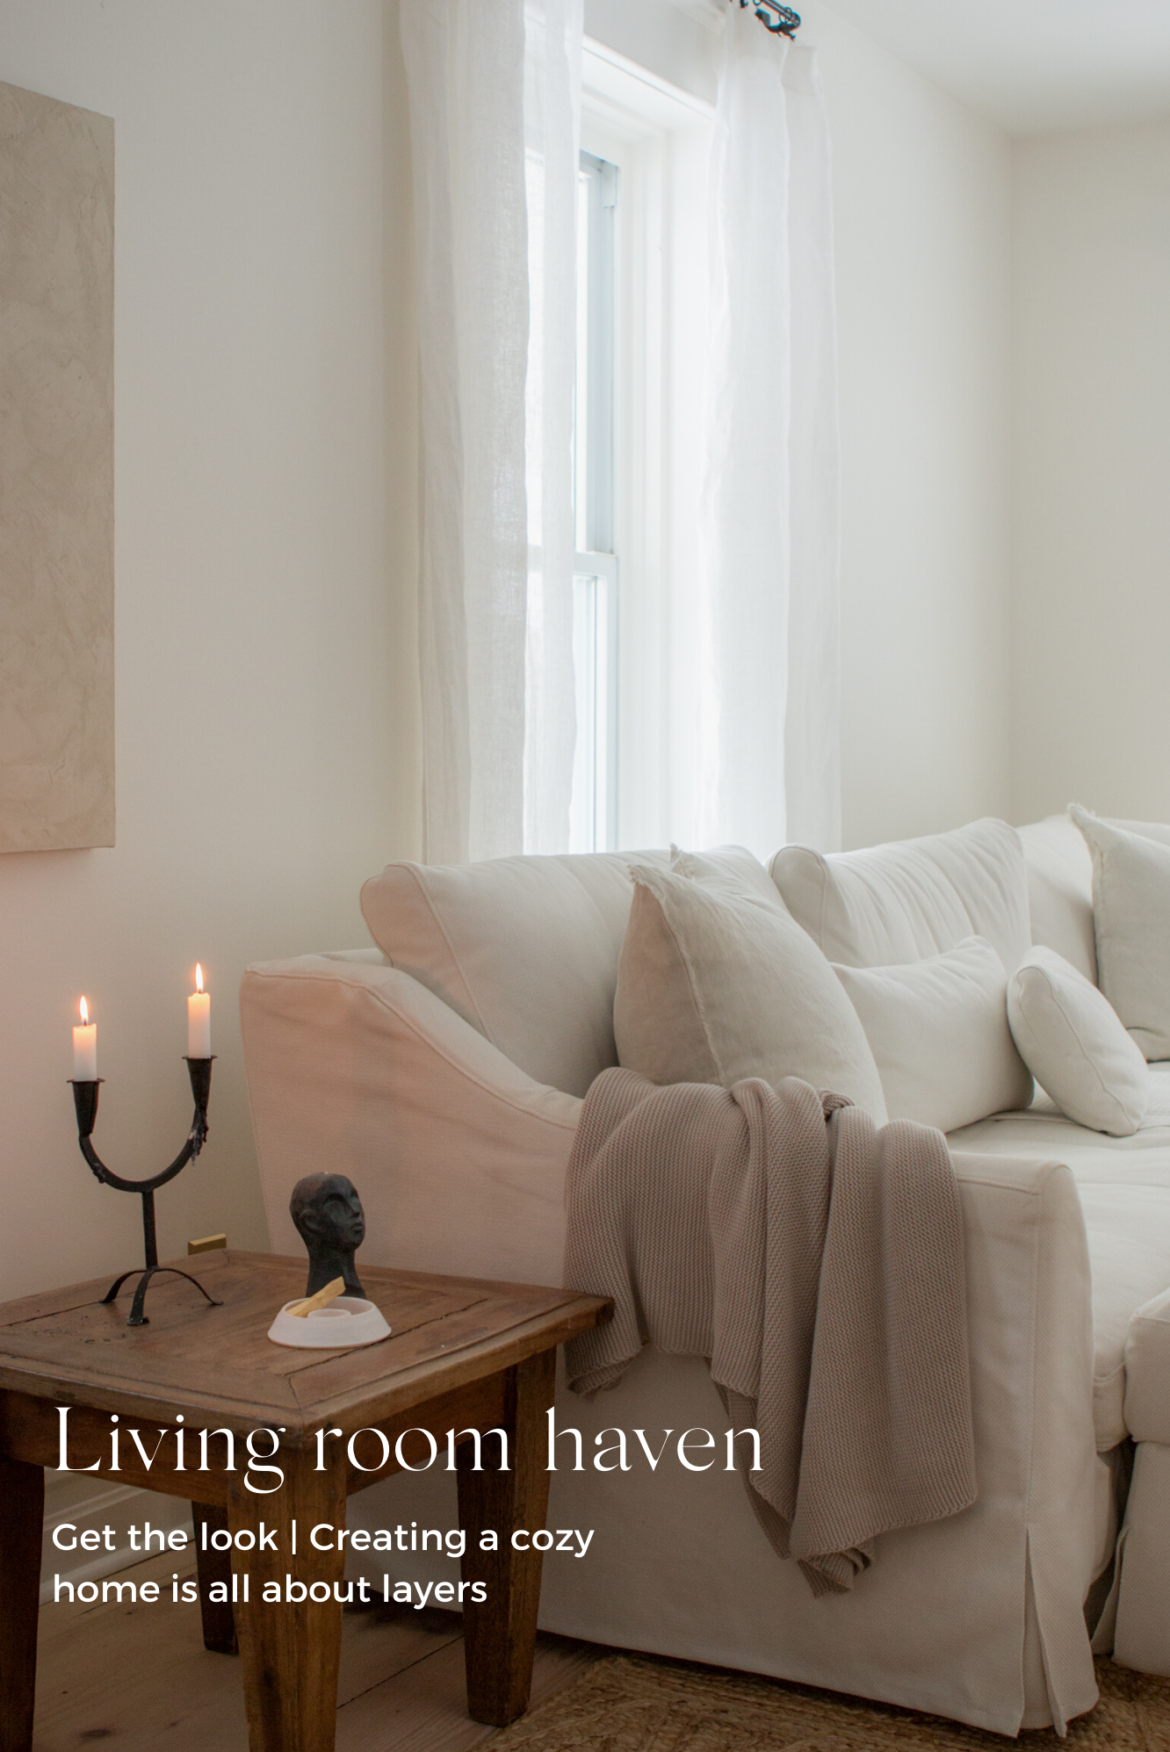 Living room haven : Get the Look | Creating a cozy home is all about layers  | Design The Life You Want To Live® lynneknowlton.com